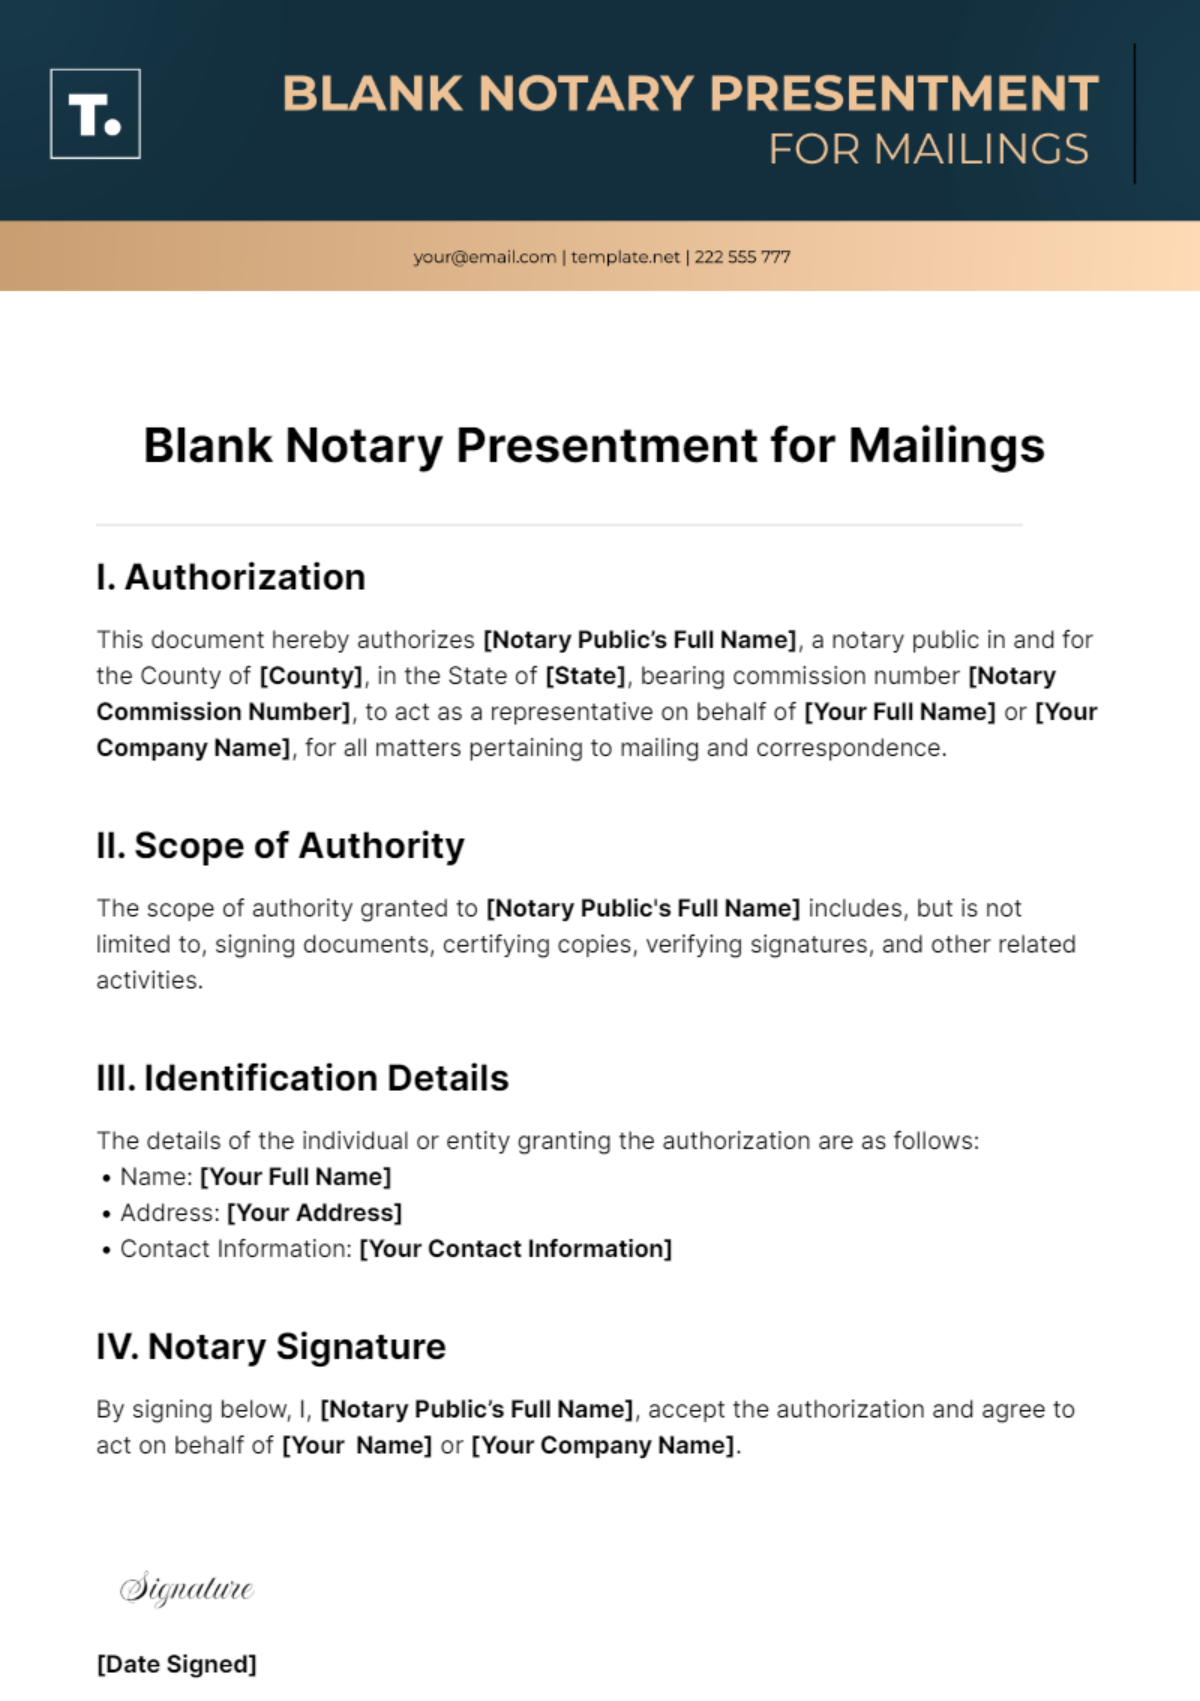 Blank Notary Presentment For Mailings Template